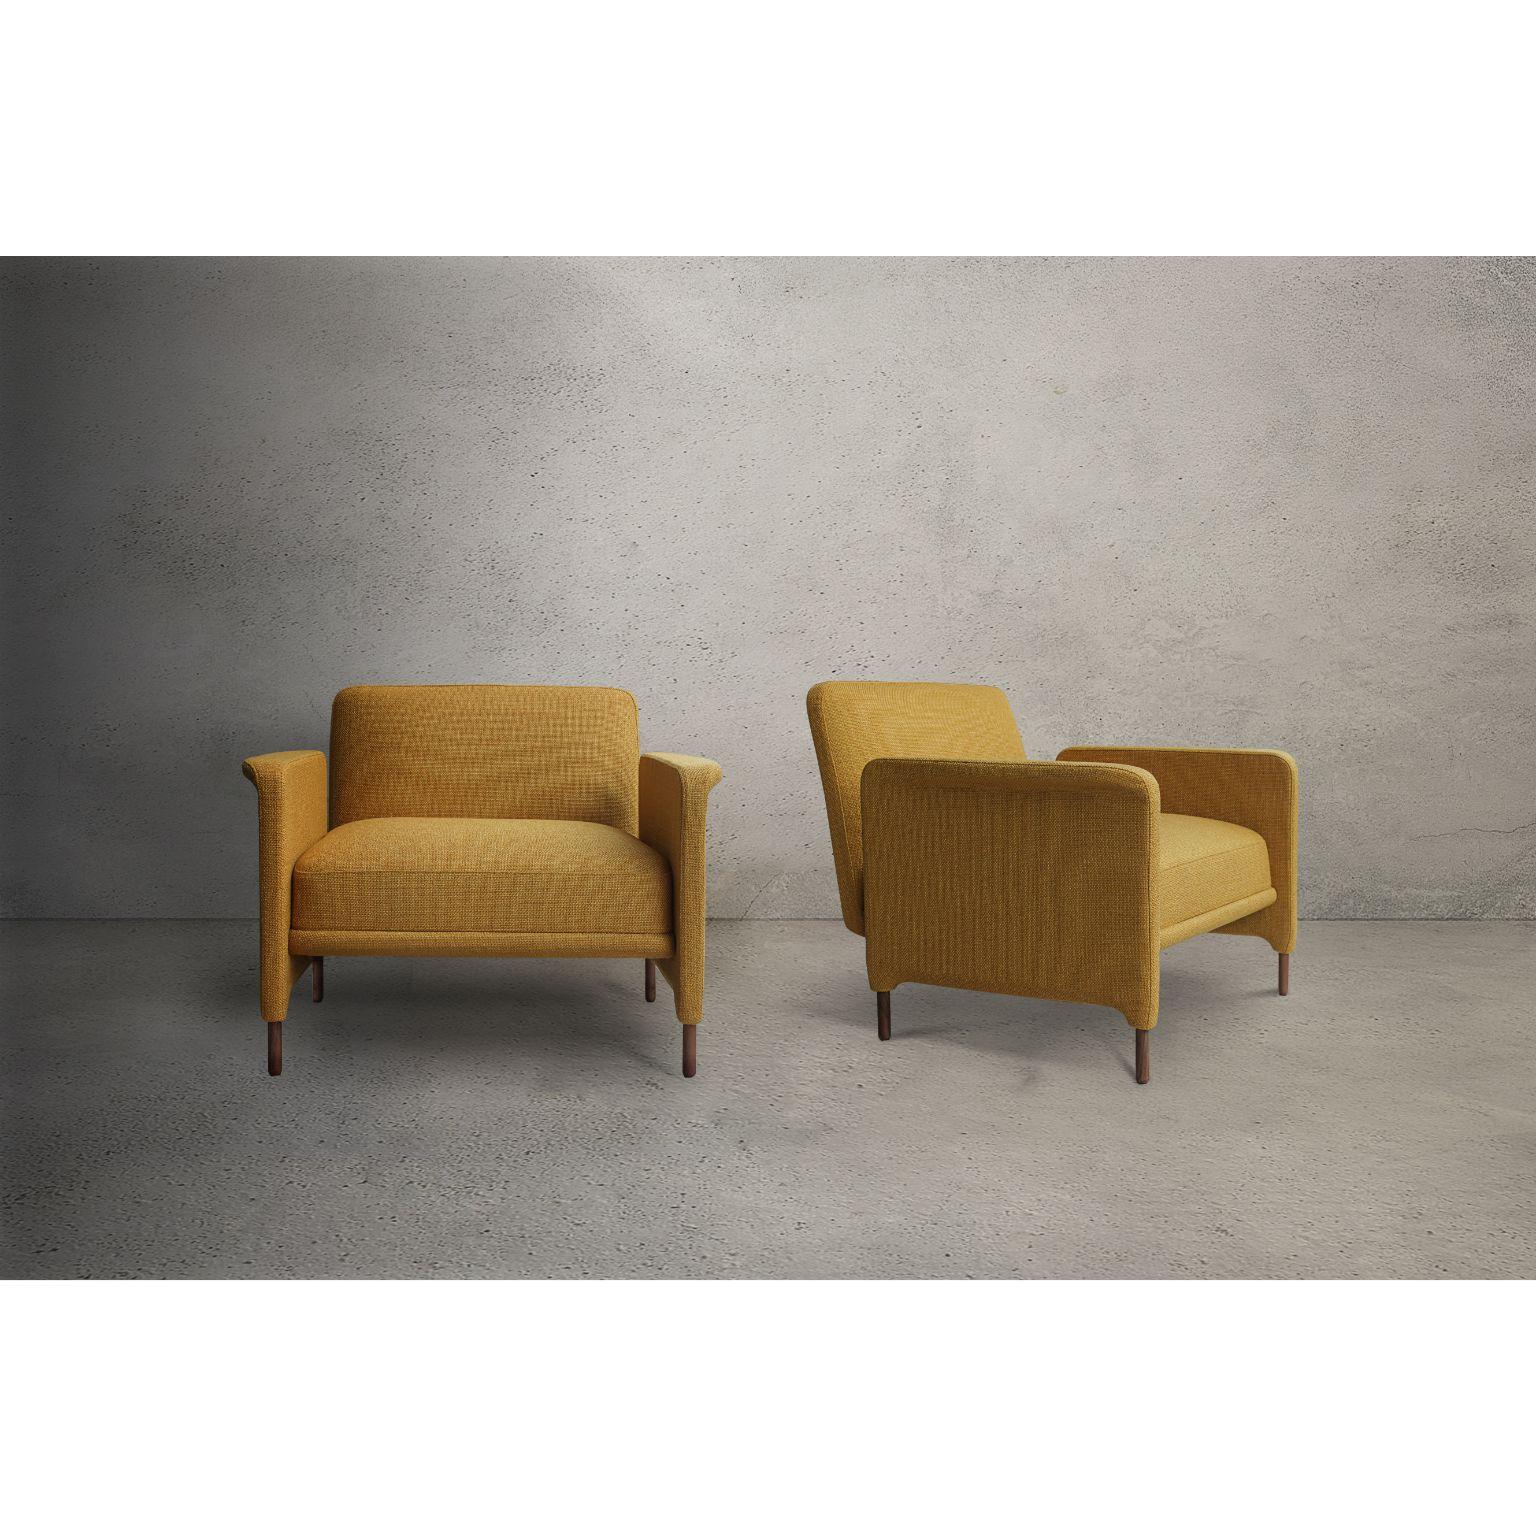 Set of 2 Carson armchair by Collector
Materials: Fully upholstered in boho 10 fabric
Solid walnut feet
Dimensions: W 86 x D 76 x H 70 cm
SH 43 cm 

  

Your favorite chair will be the one that allows you to relax in a way that make your mind